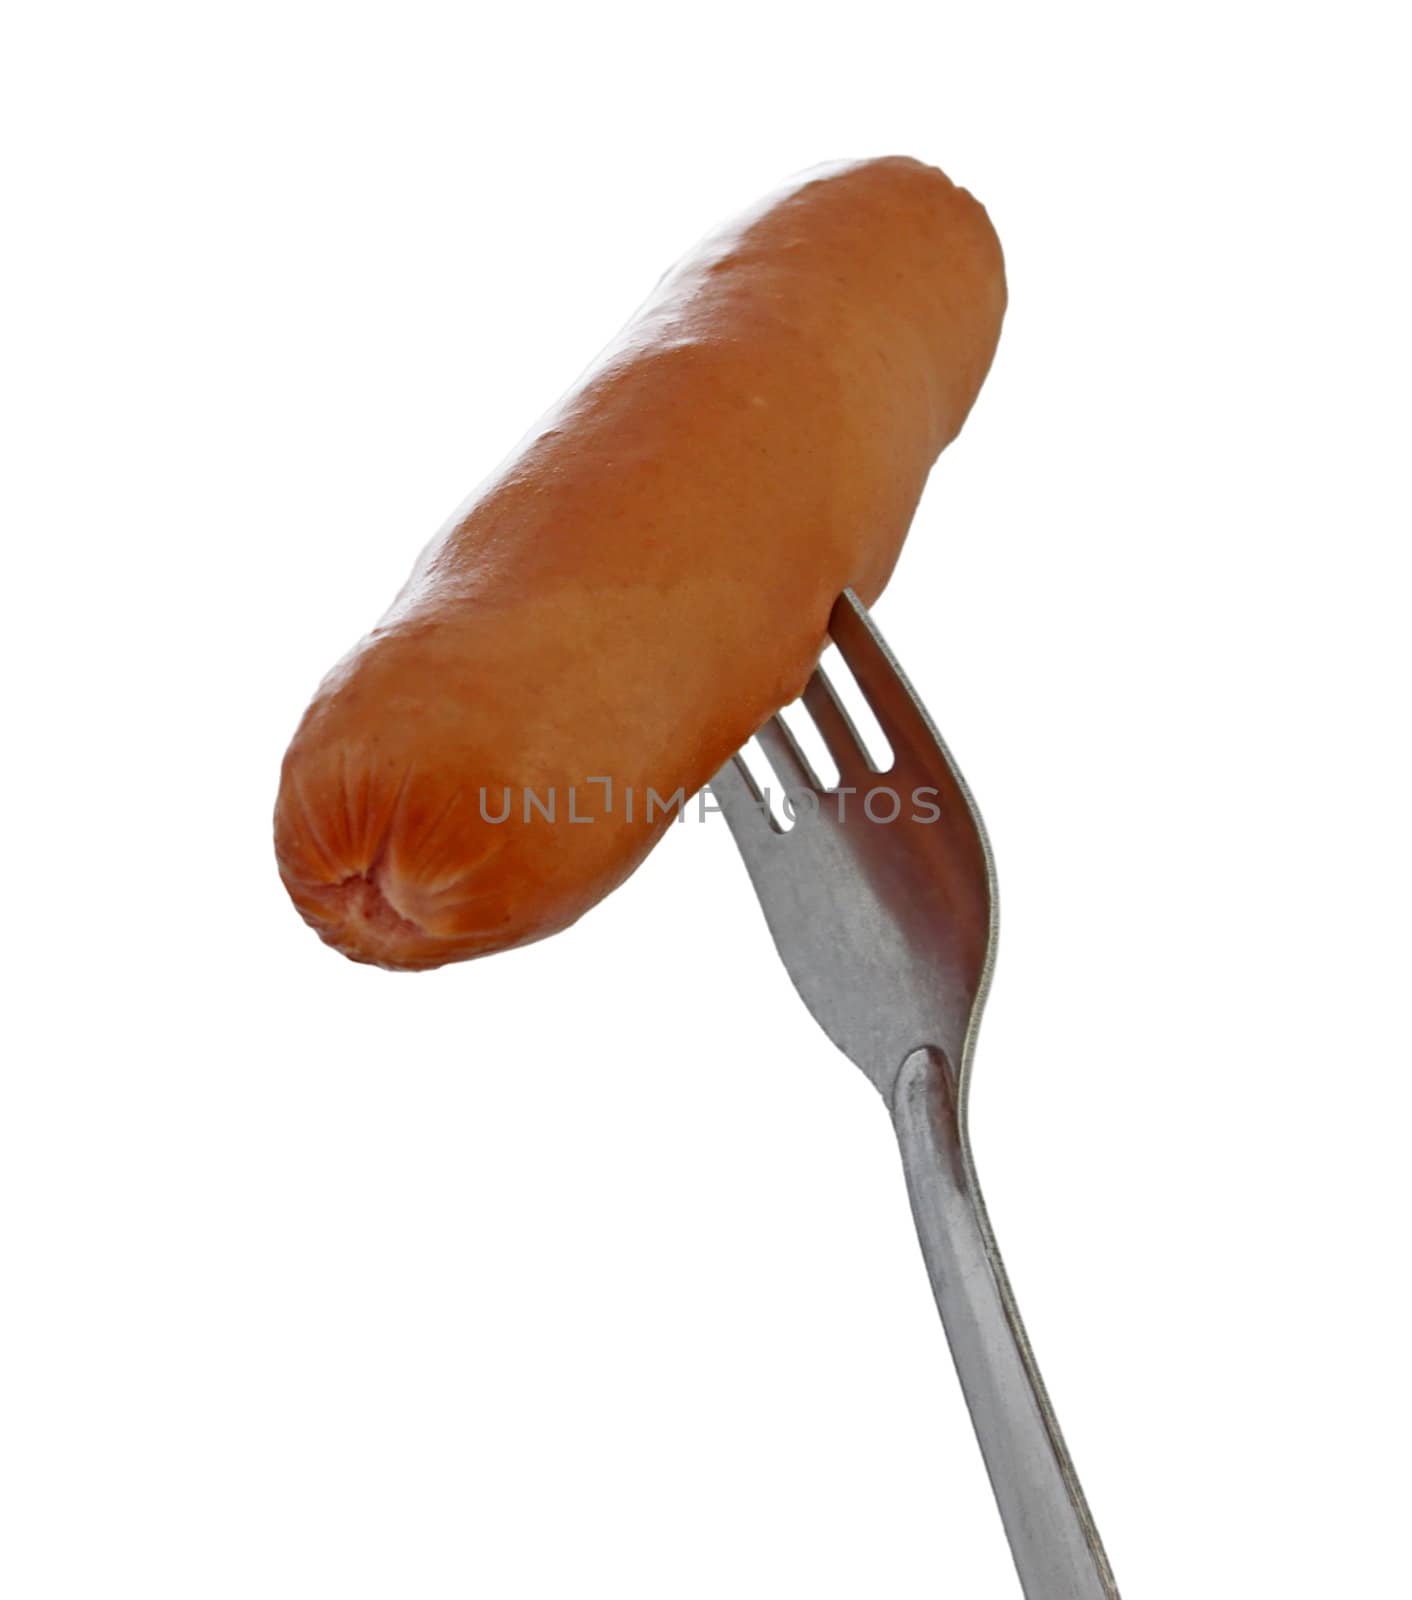 sausage on a fork isolated on white